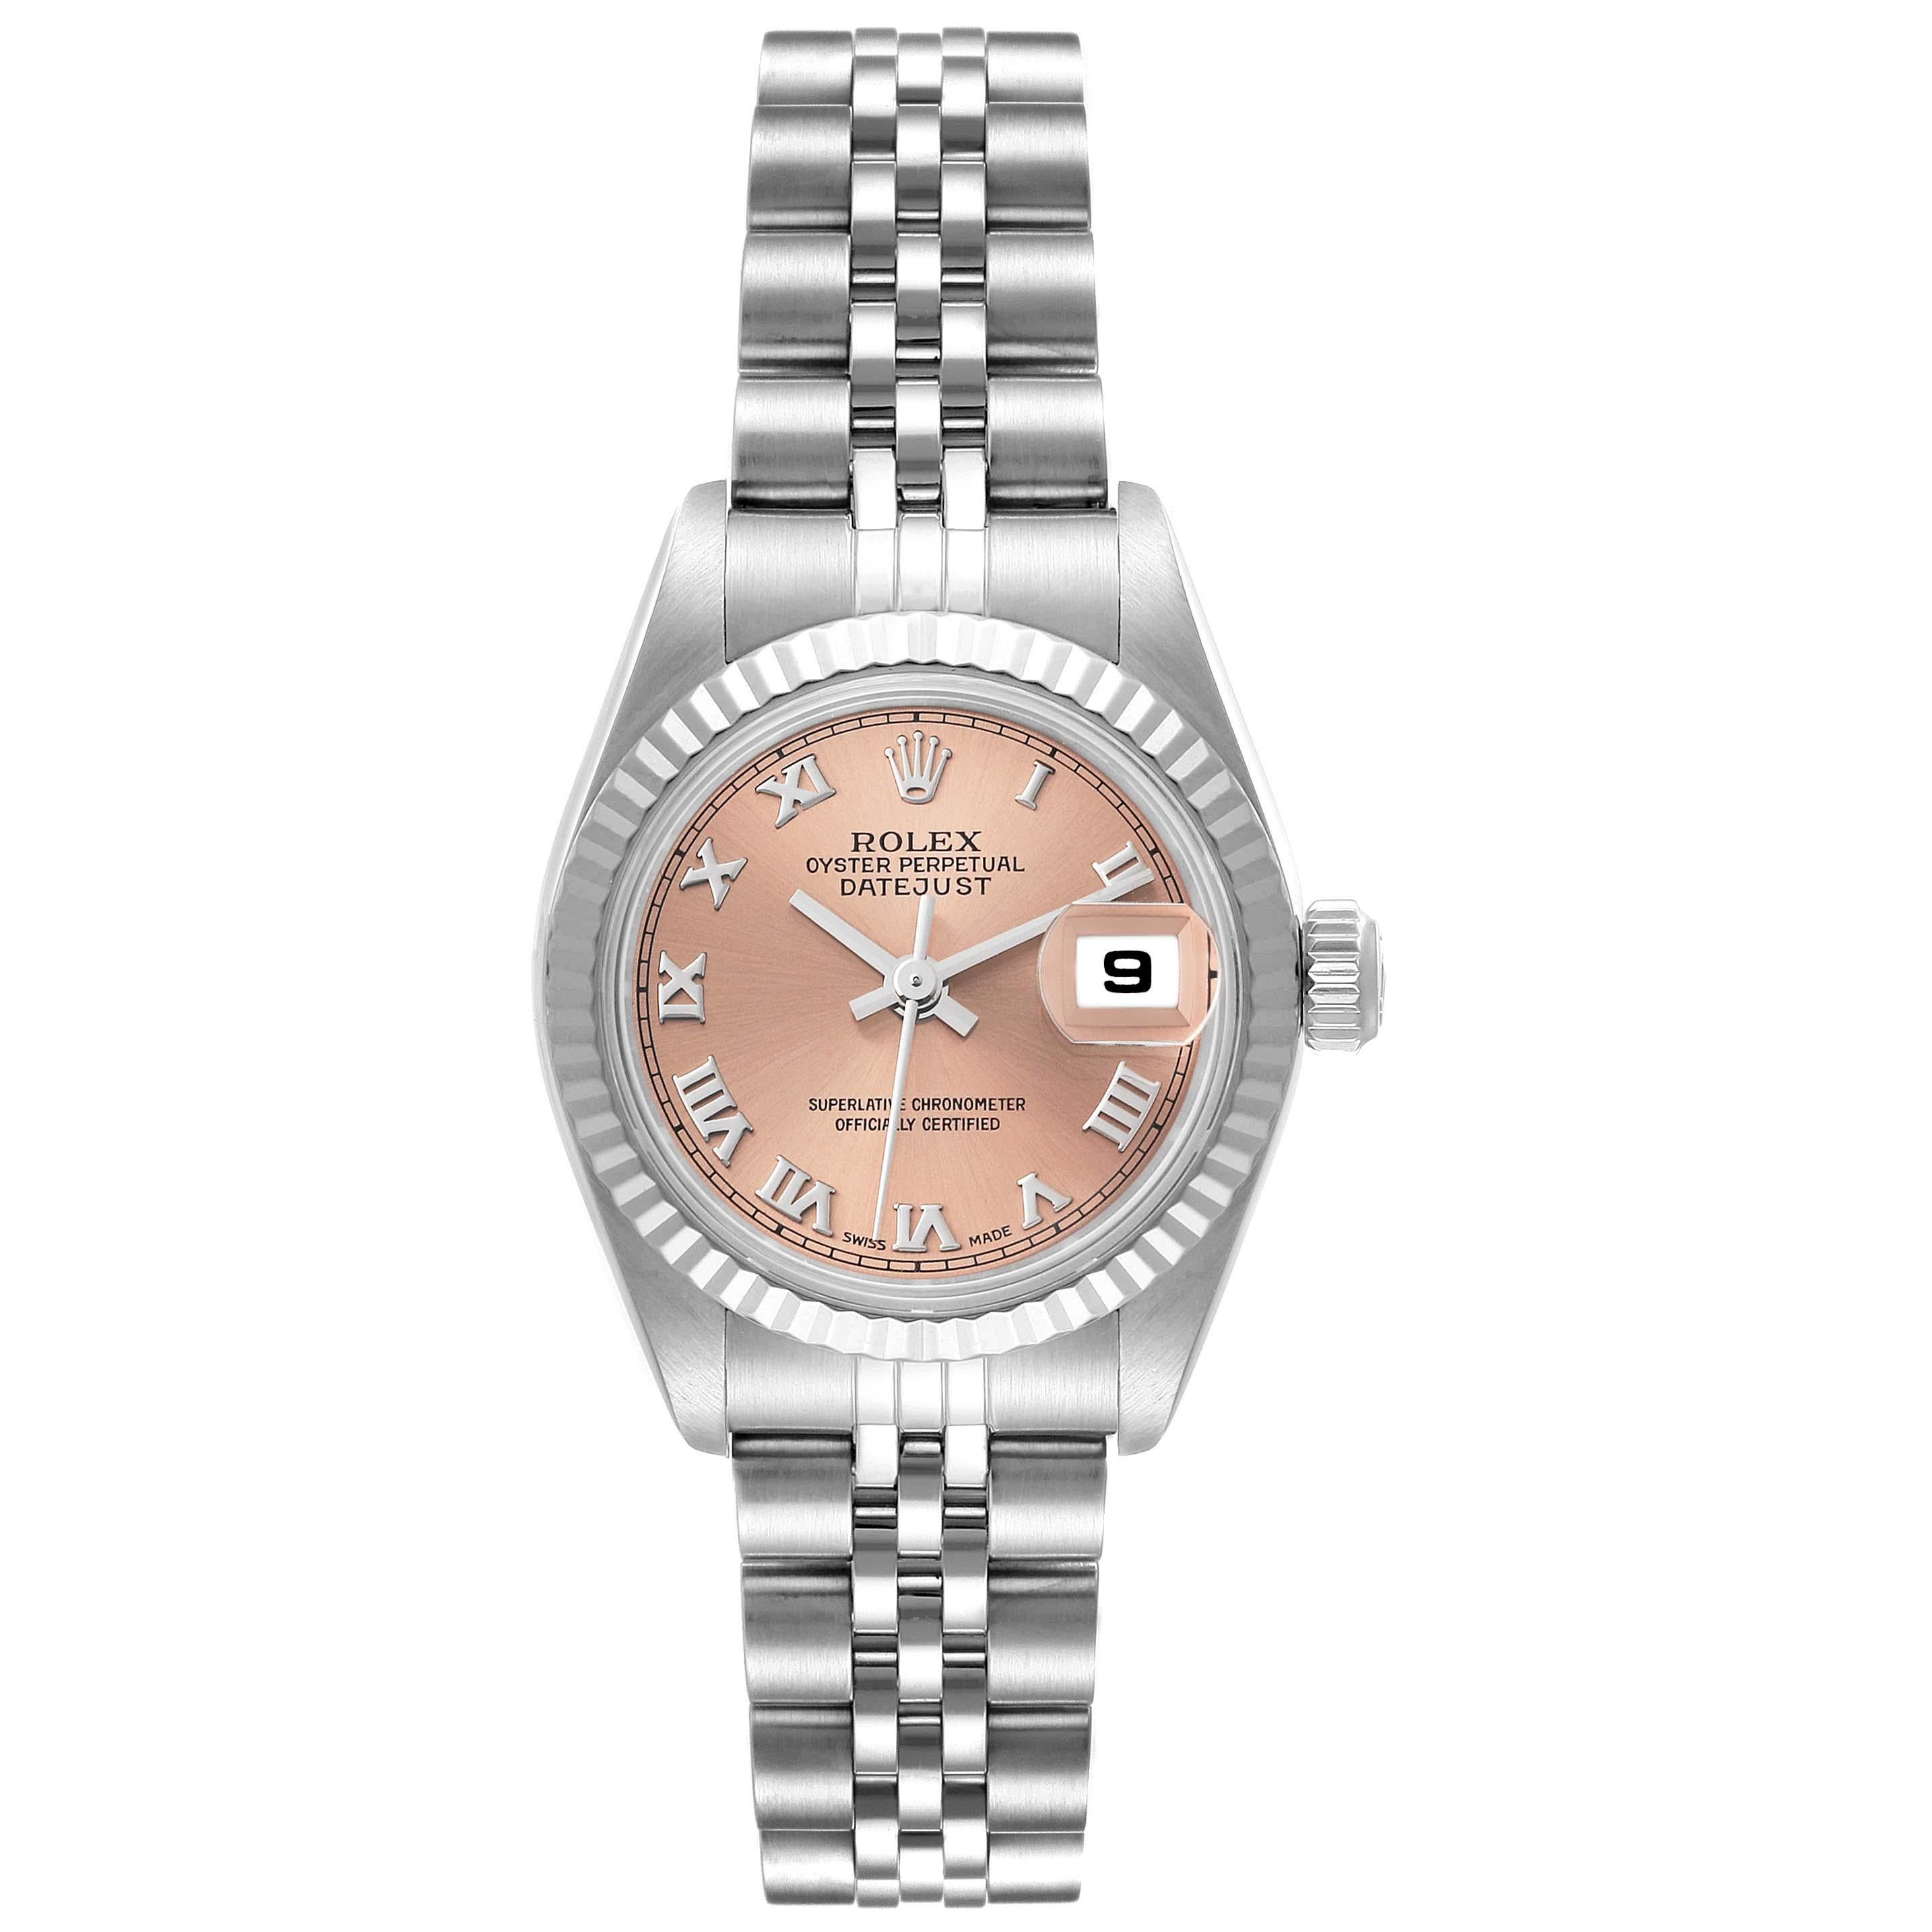 Rolex Datejust Salmon Dial White Gold Steel Ladies Watch 79174 Box Papers. Officially certified chronometer automatic self-winding movement. Stainless steel oyster case 26.0 mm in diameter. Rolex logo on the crown. 18K white gold fluted bezel.